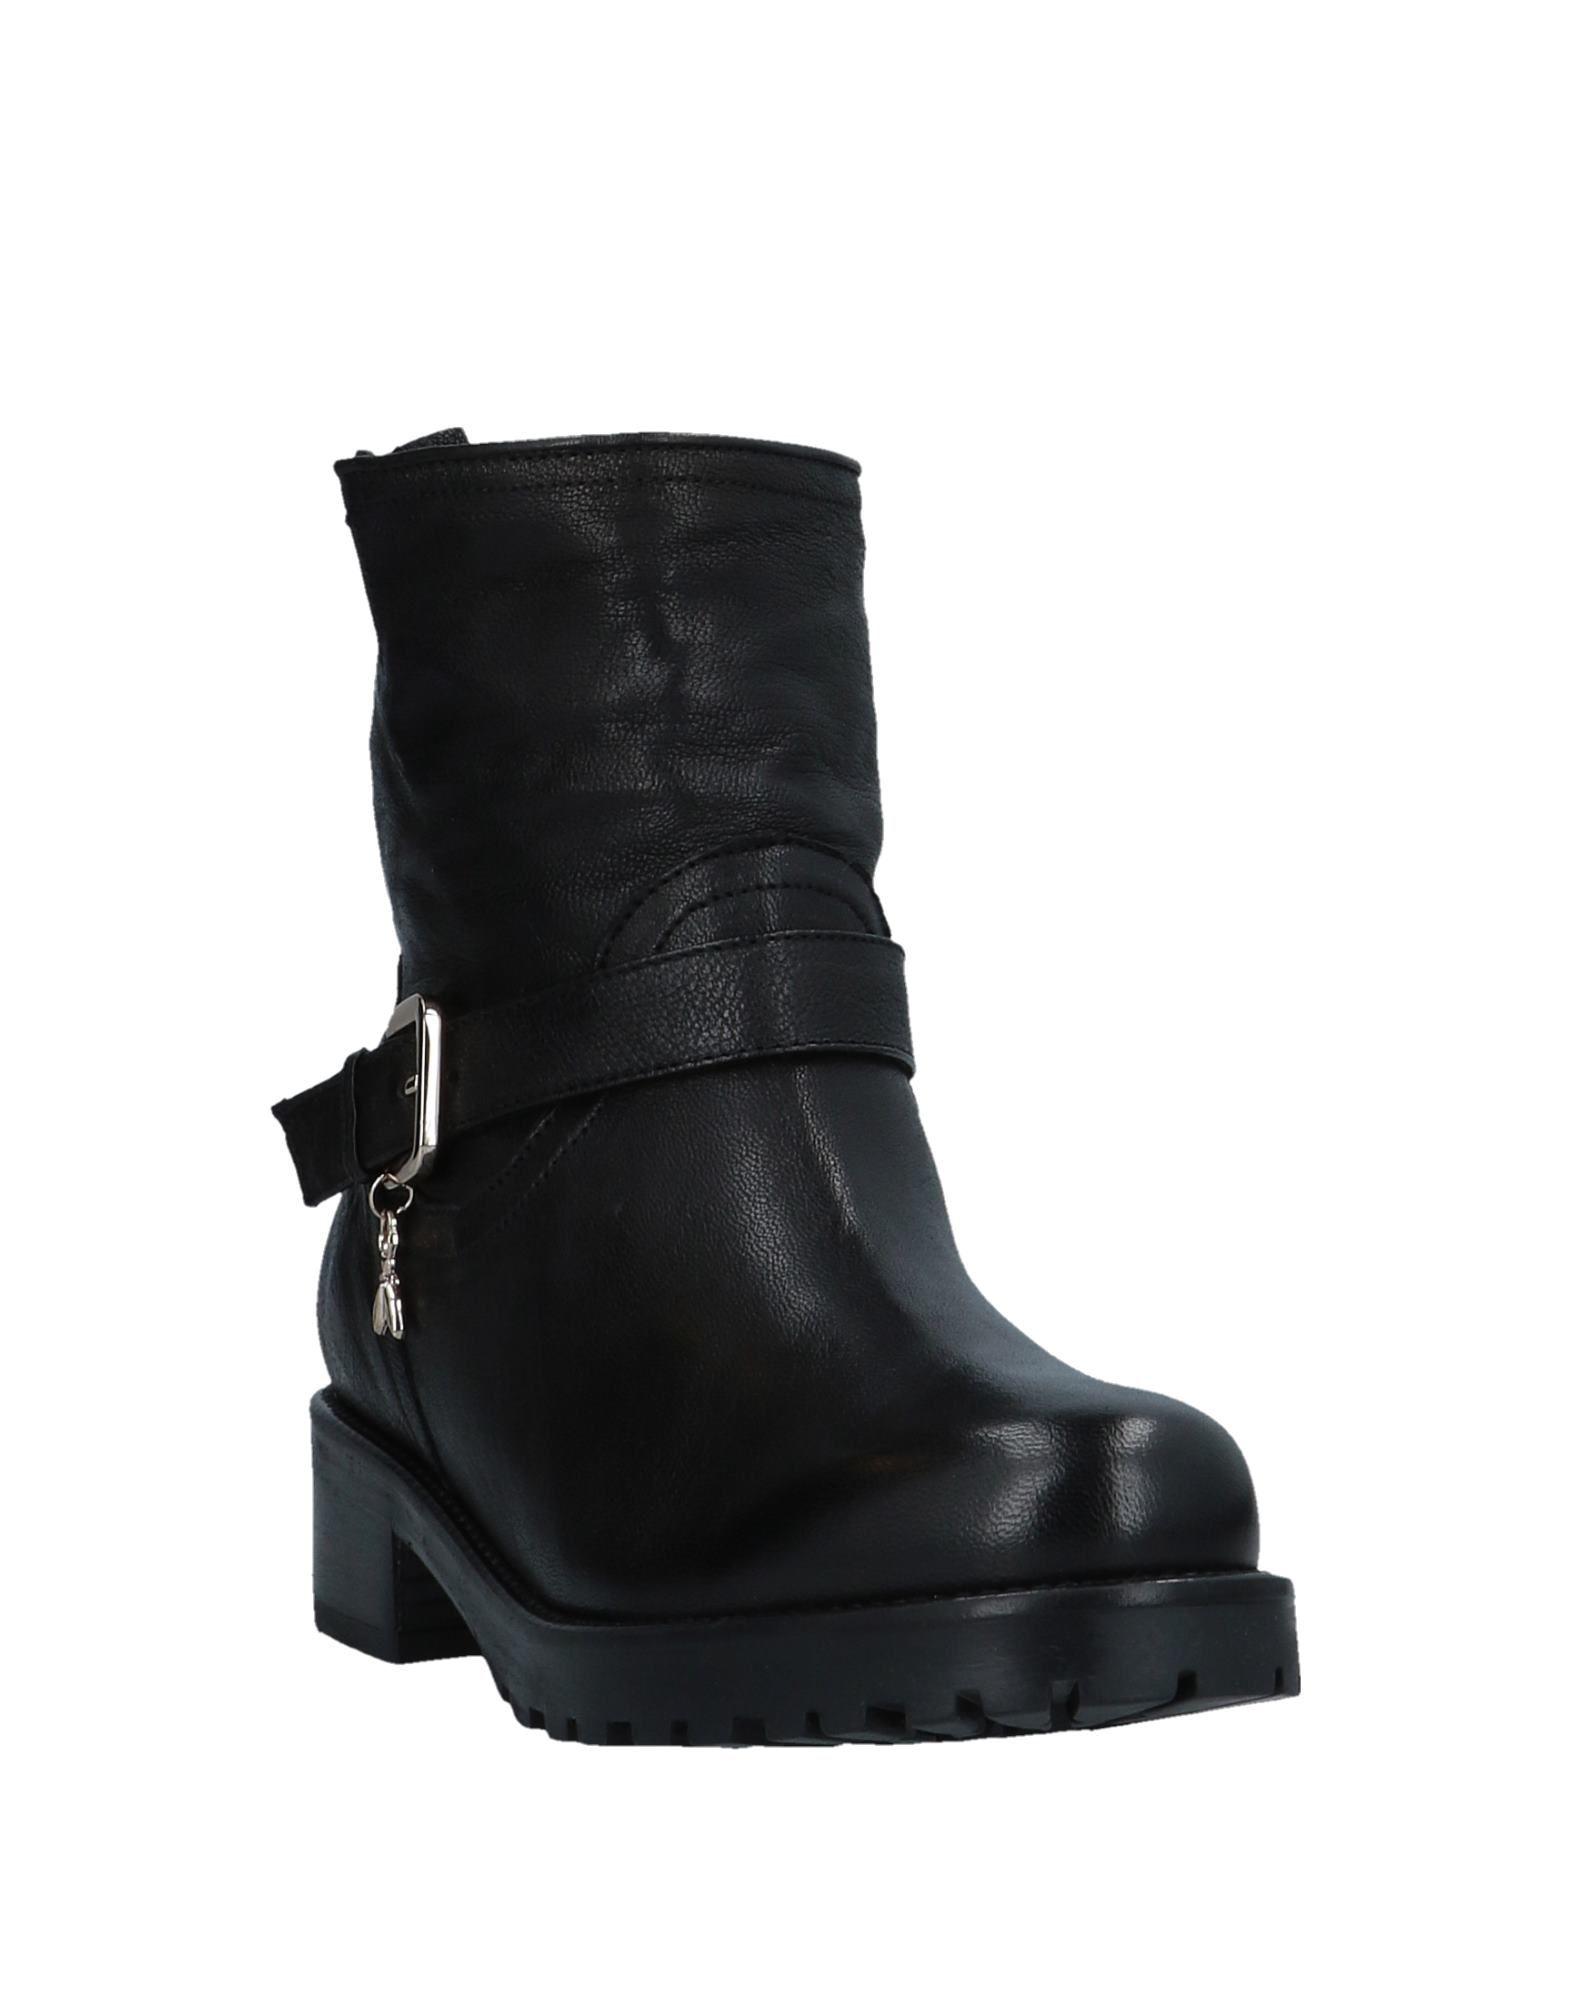 Patrizia Pepe Leather Ankle Boots in Black - Lyst